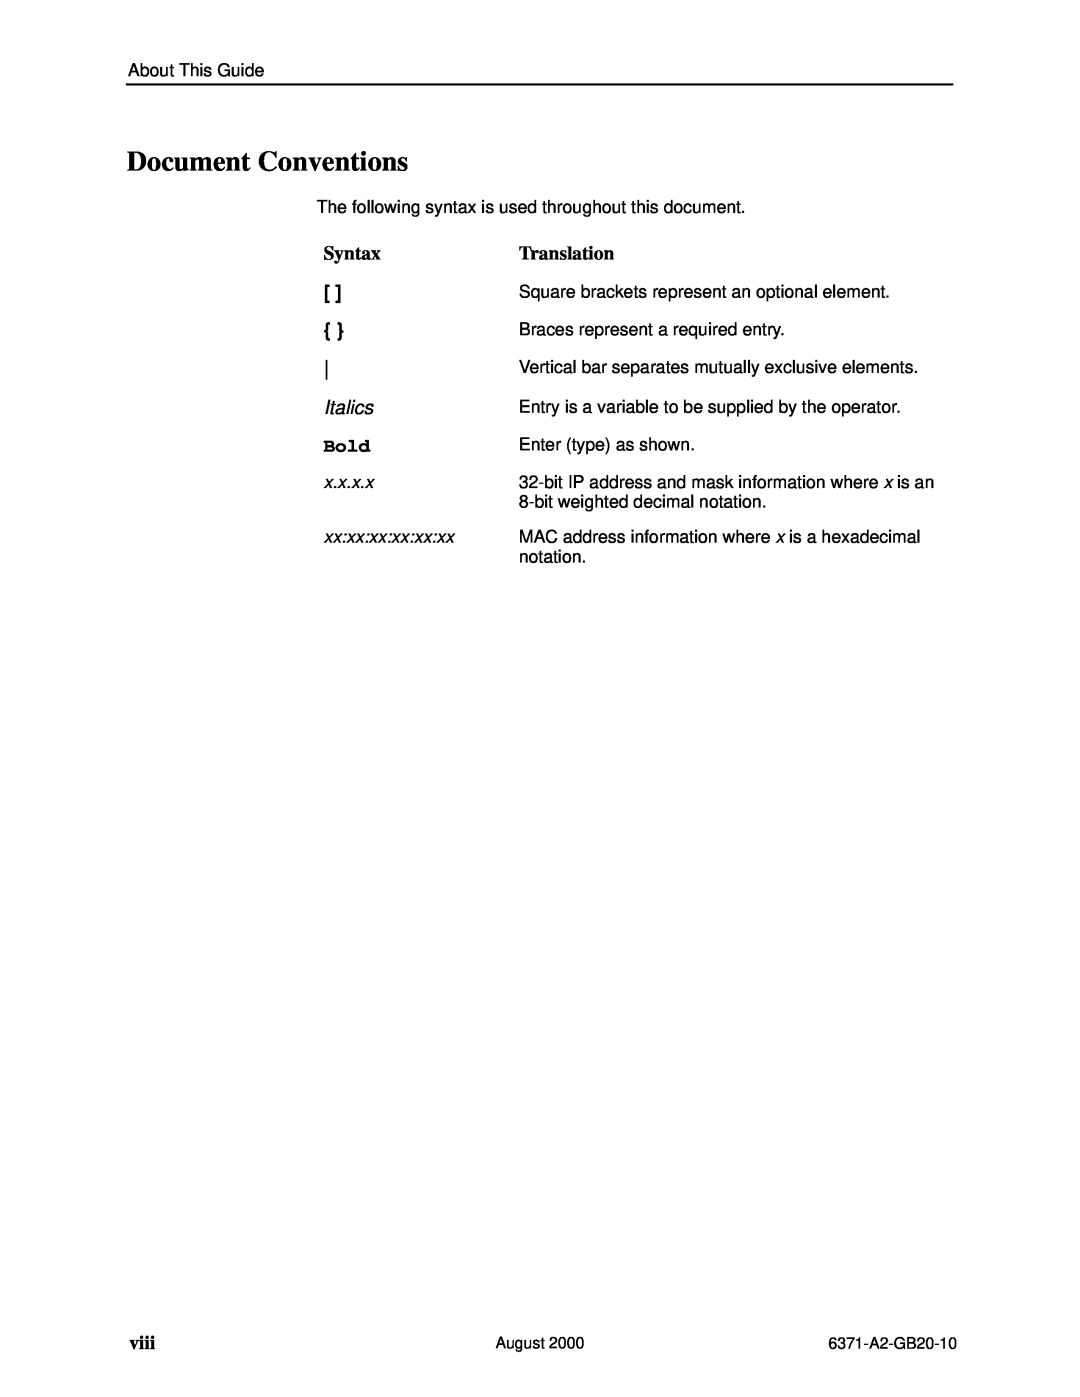 Paradyne Routers manual Document Conventions, Syntax, Translation, Italics, Bold, viii 